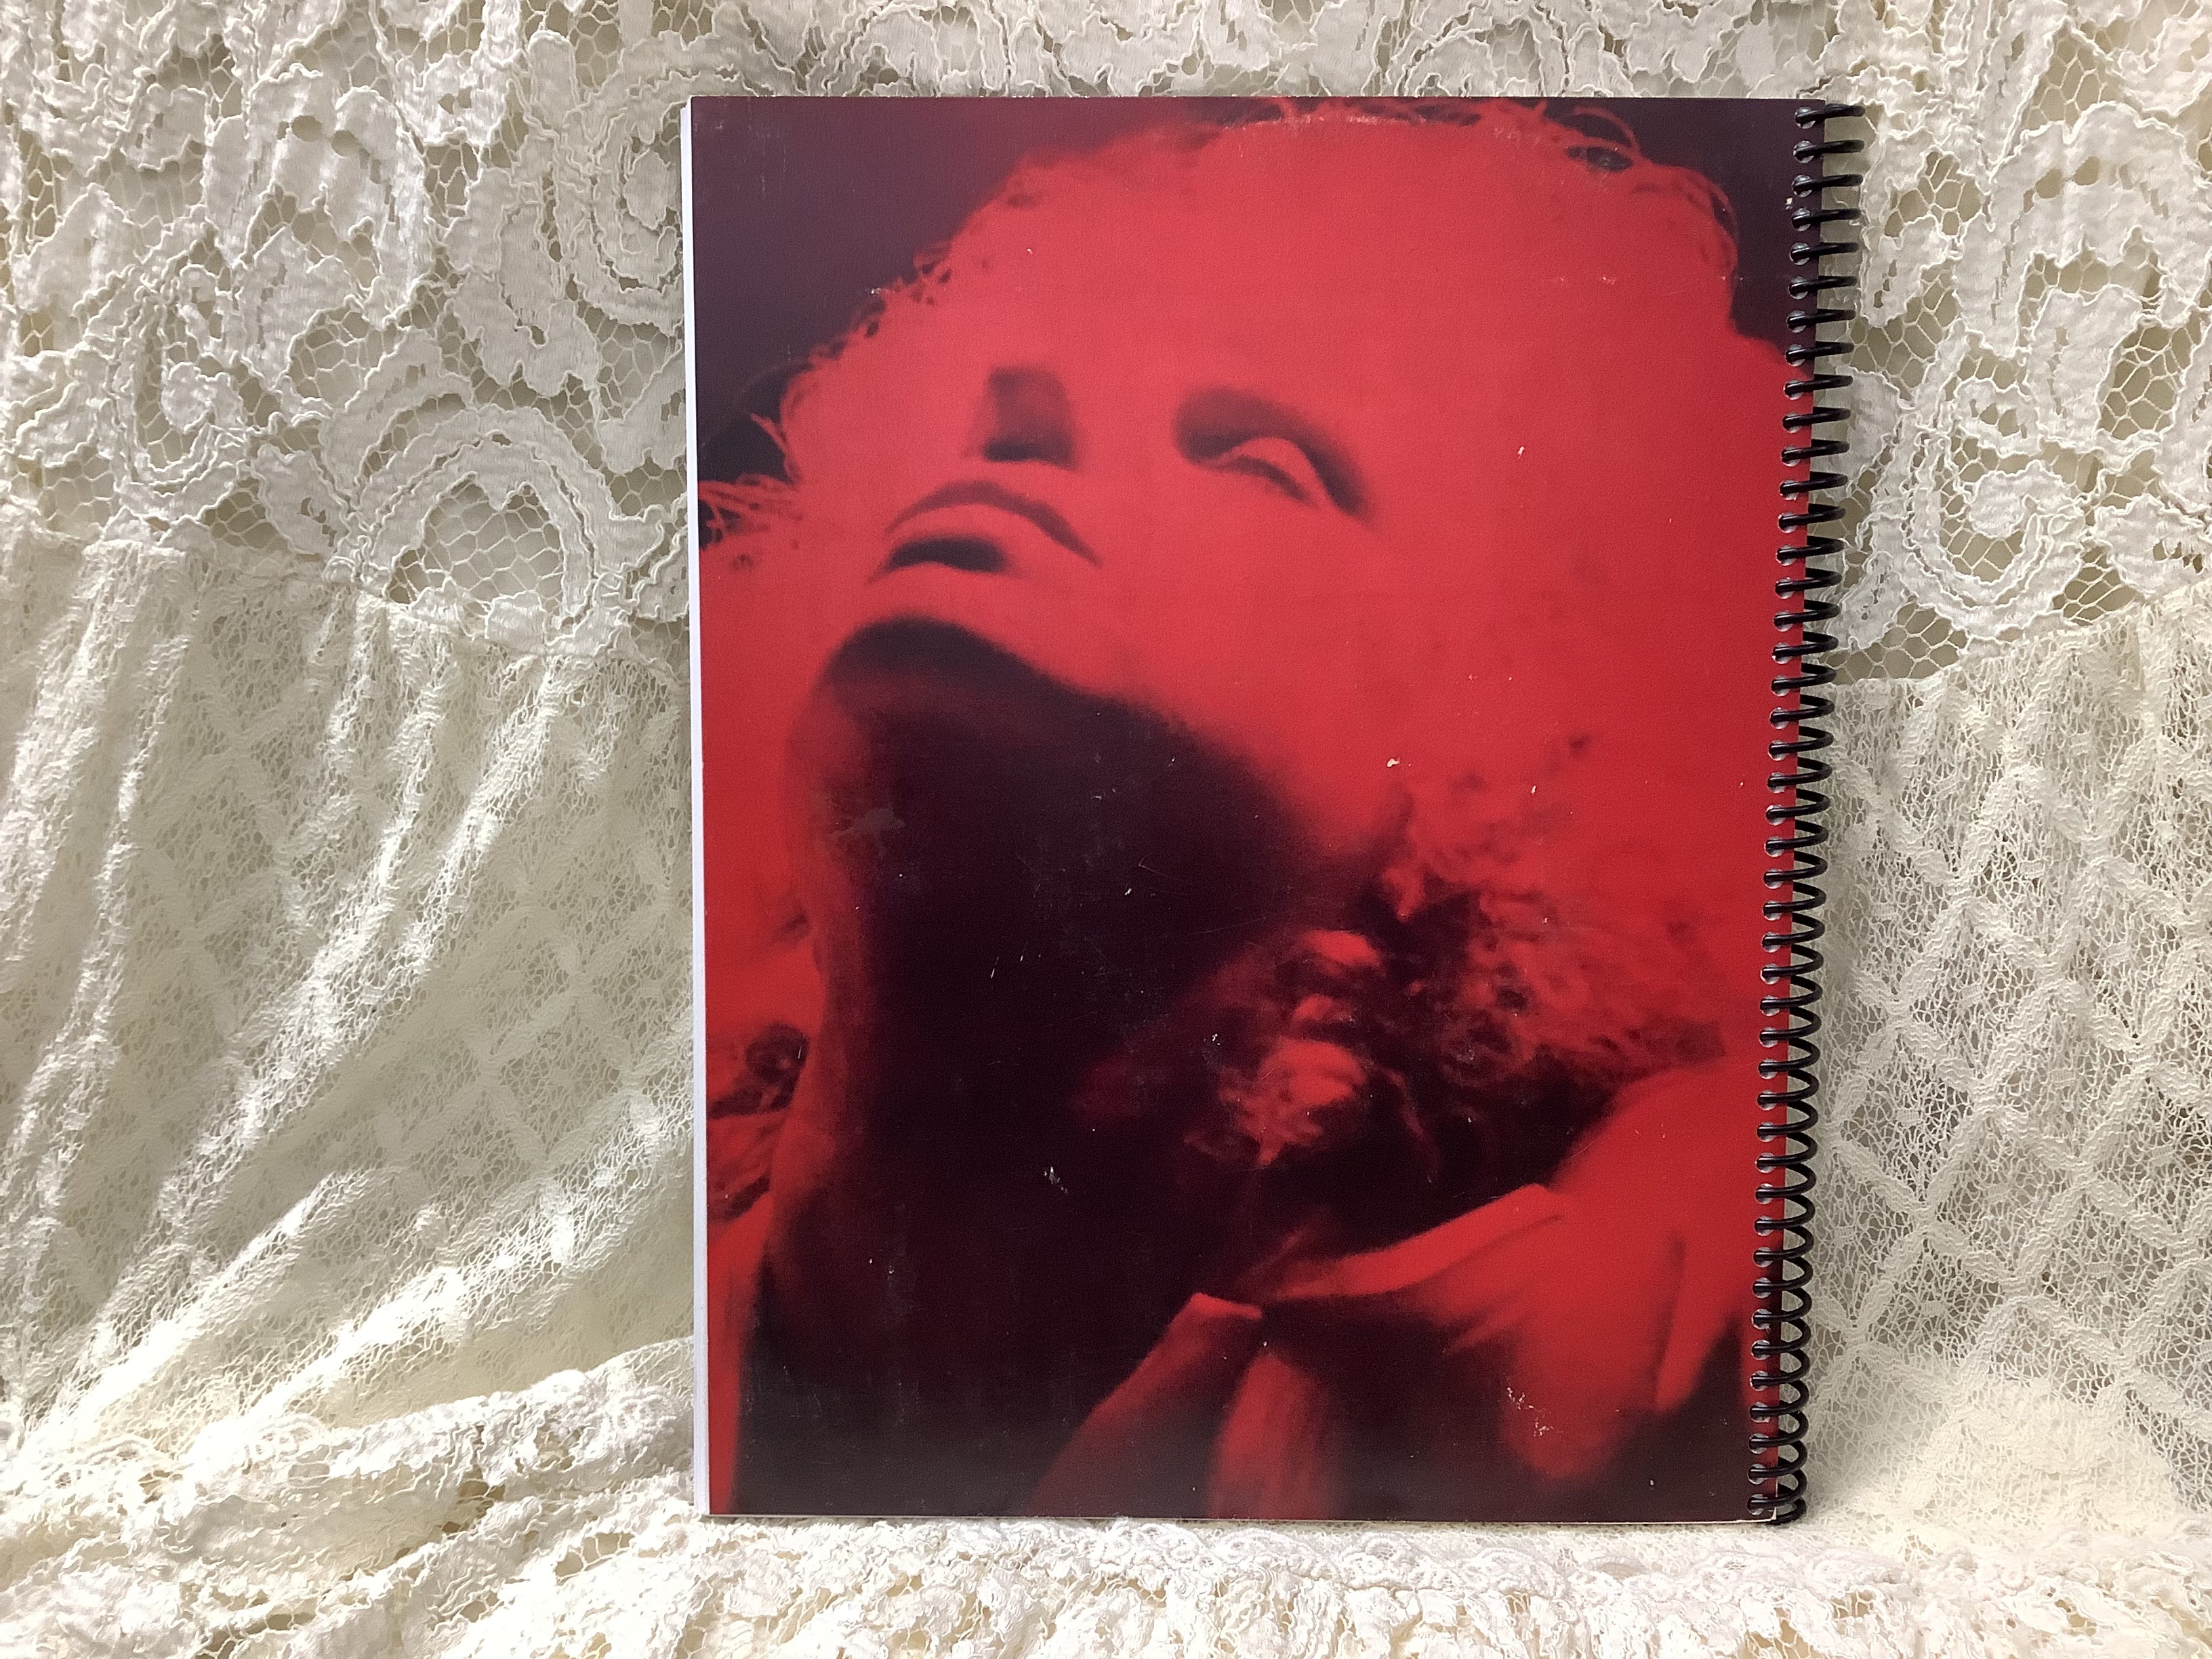 "A Star Is Born" Recycled Album Cover Notebook